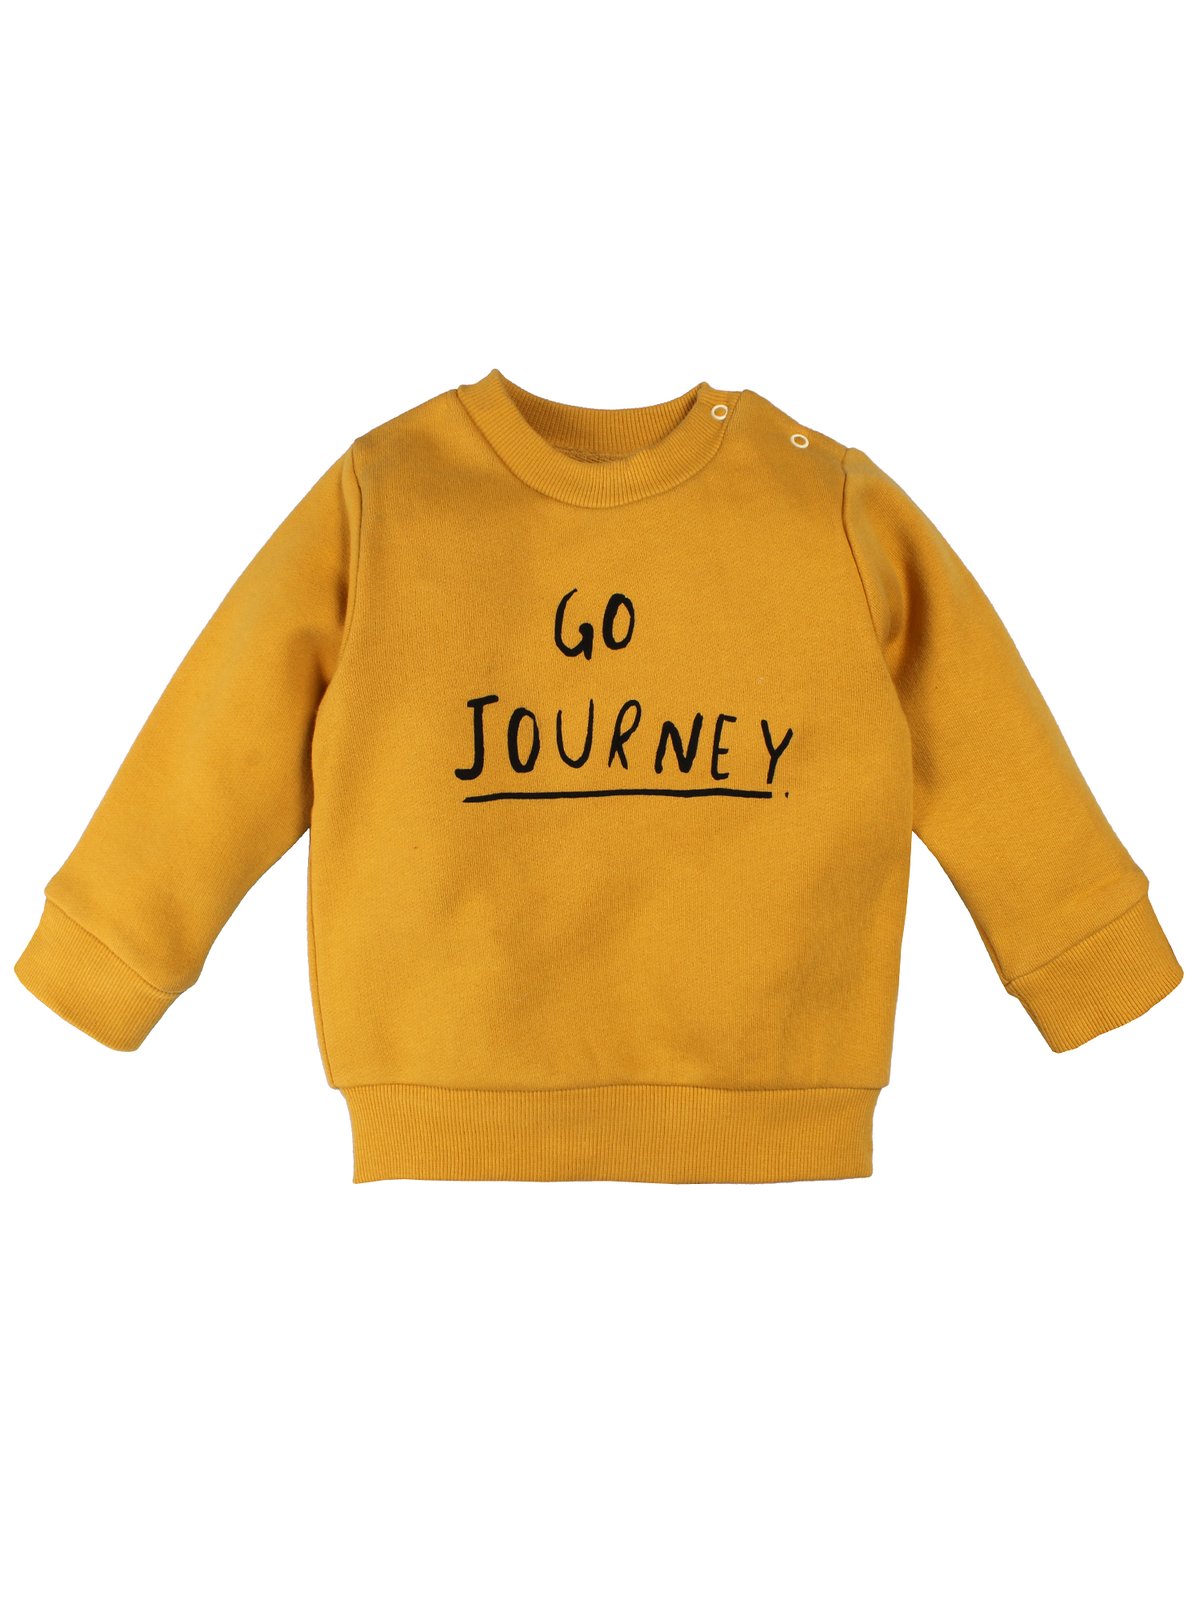 Organic Cotton Round Neck Yellow Color Sweatshirt For Unisex Babies And Kids